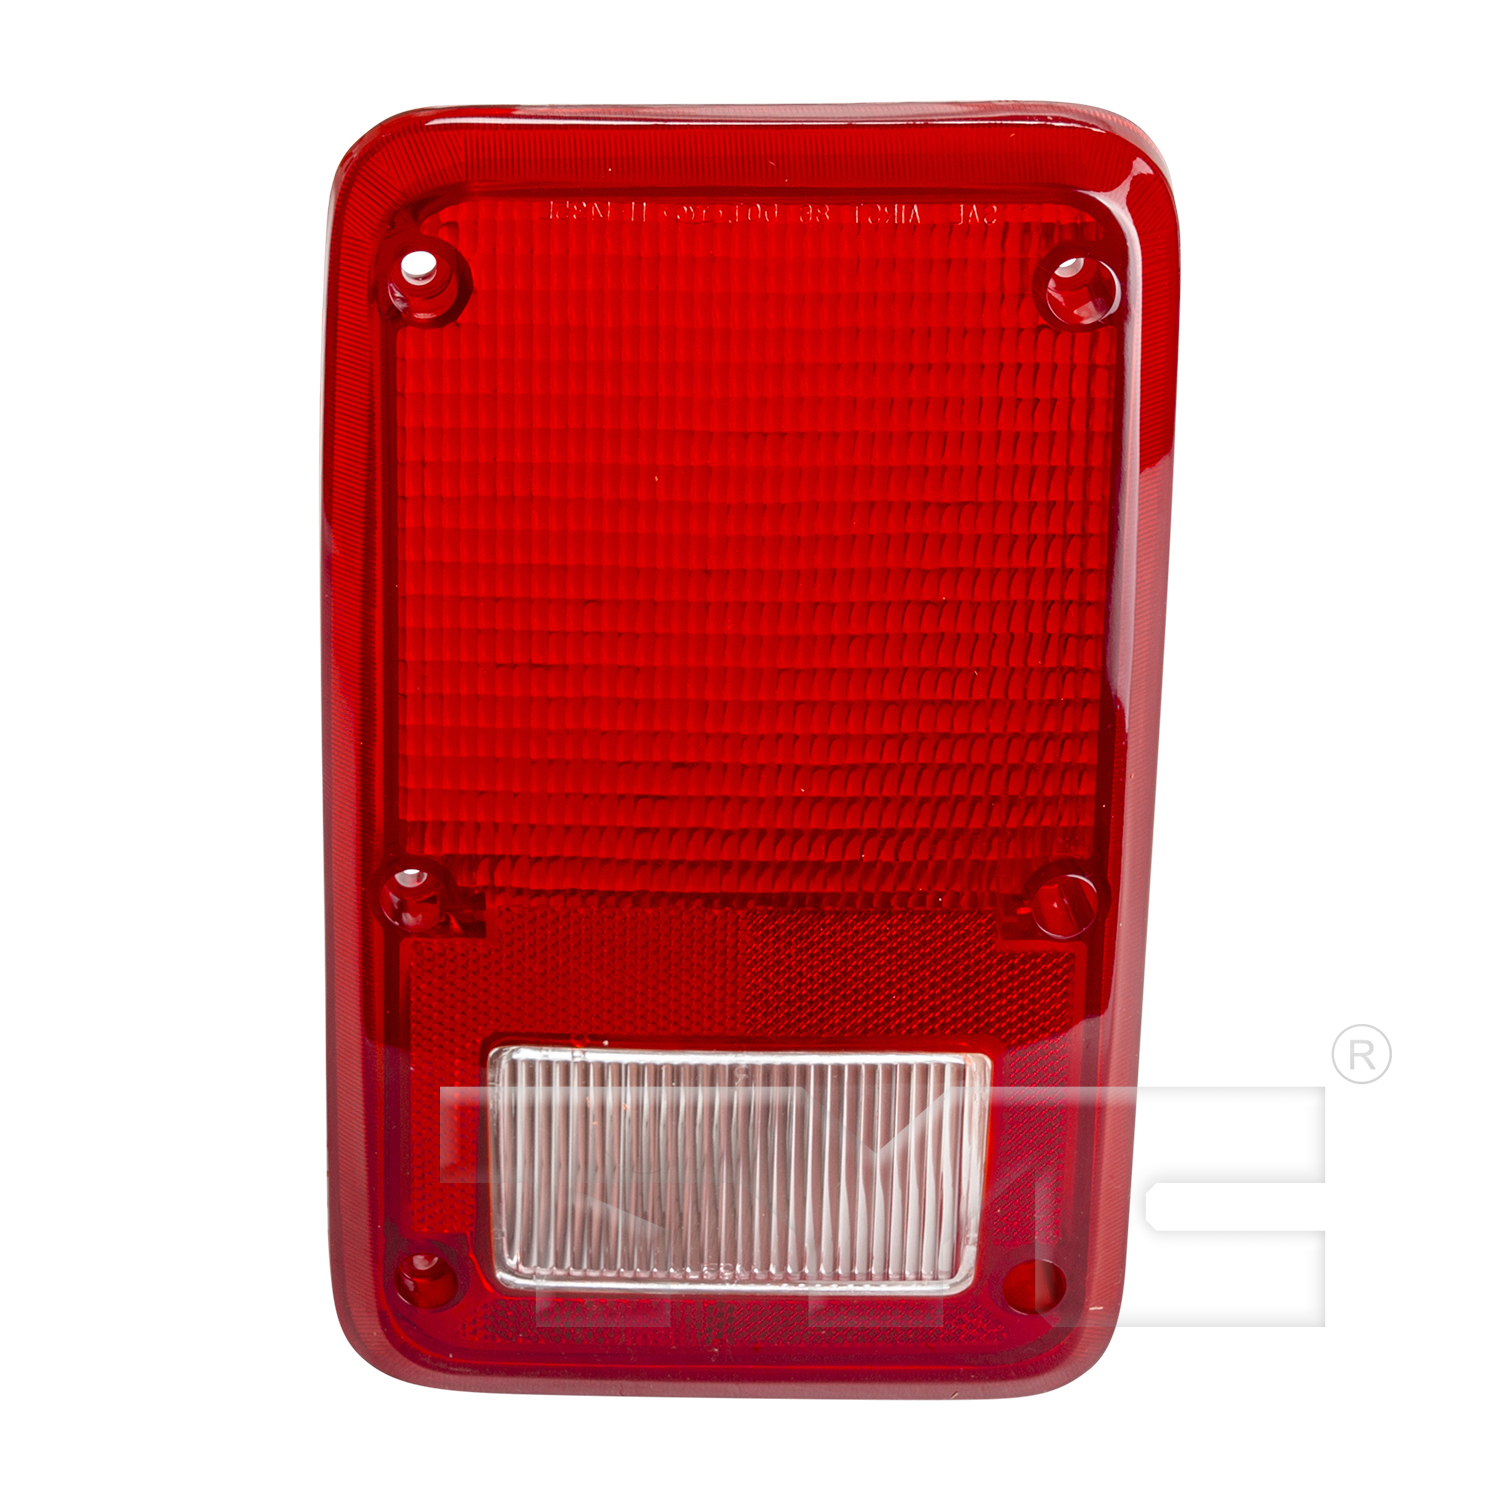 Aftermarket TAILLIGHTS for PLYMOUTH - PB300, PB300,78-80,LT Taillamp lens